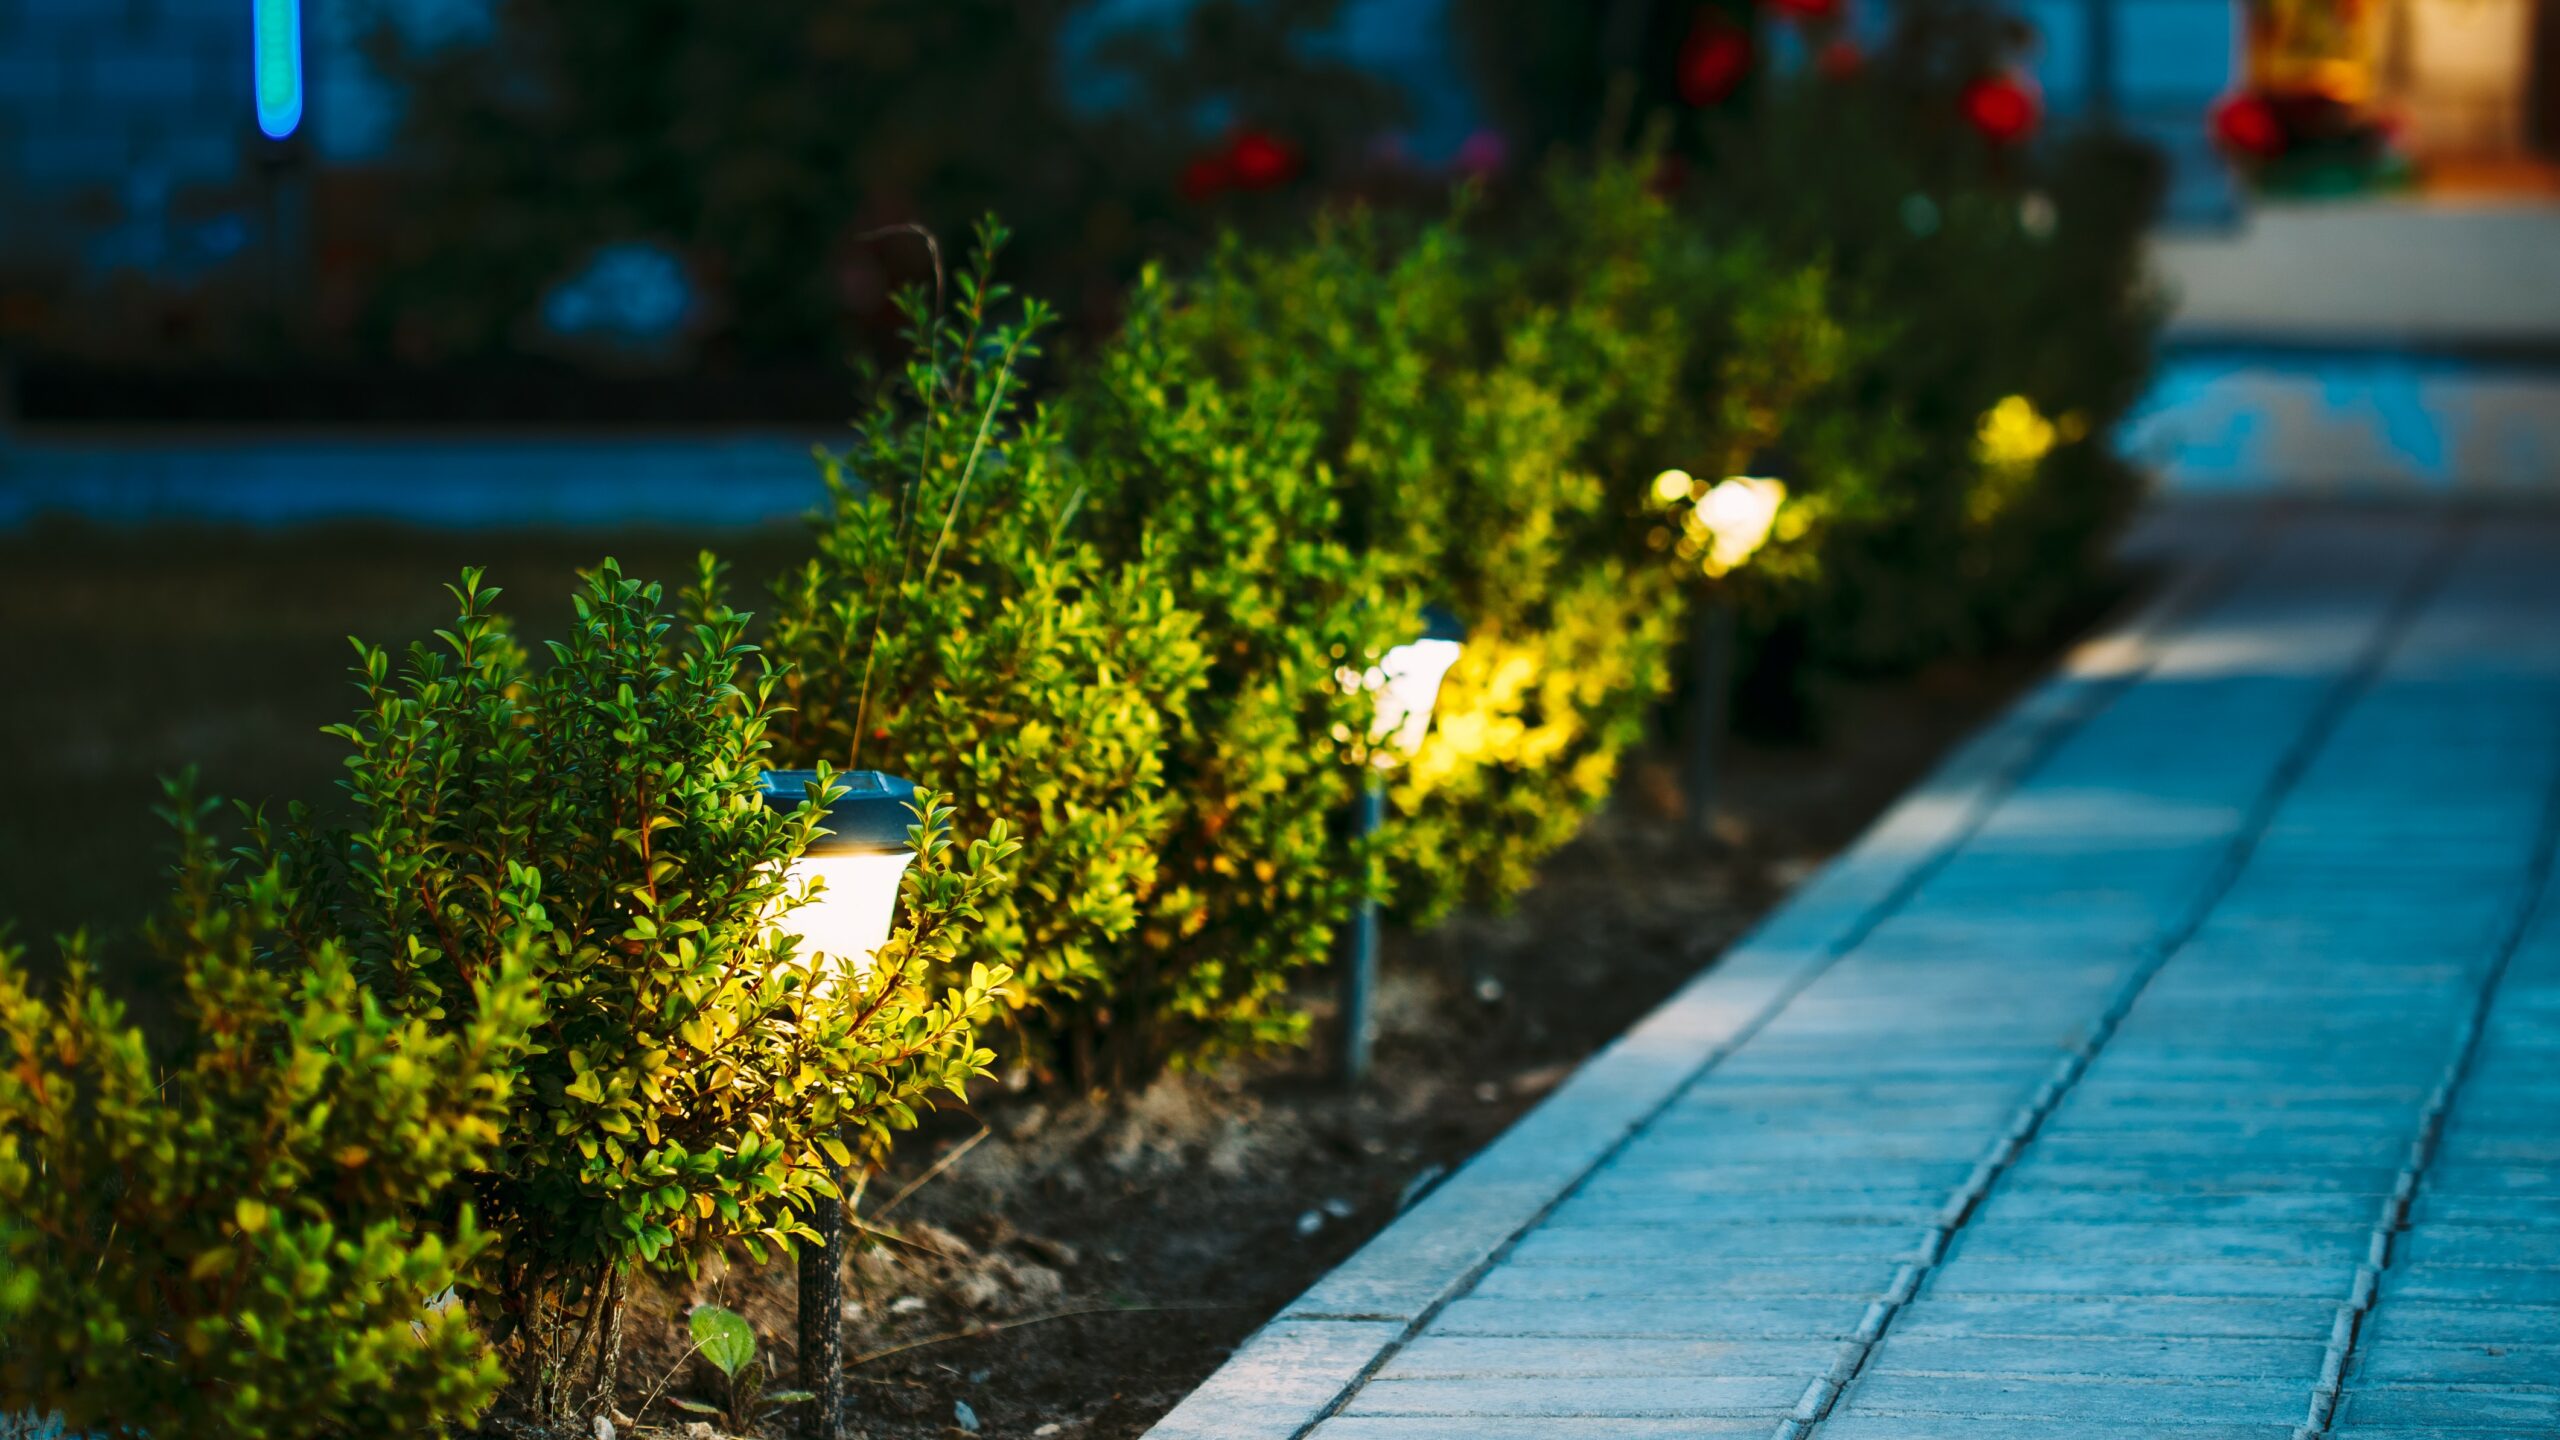 Flower bed illuminated by lights